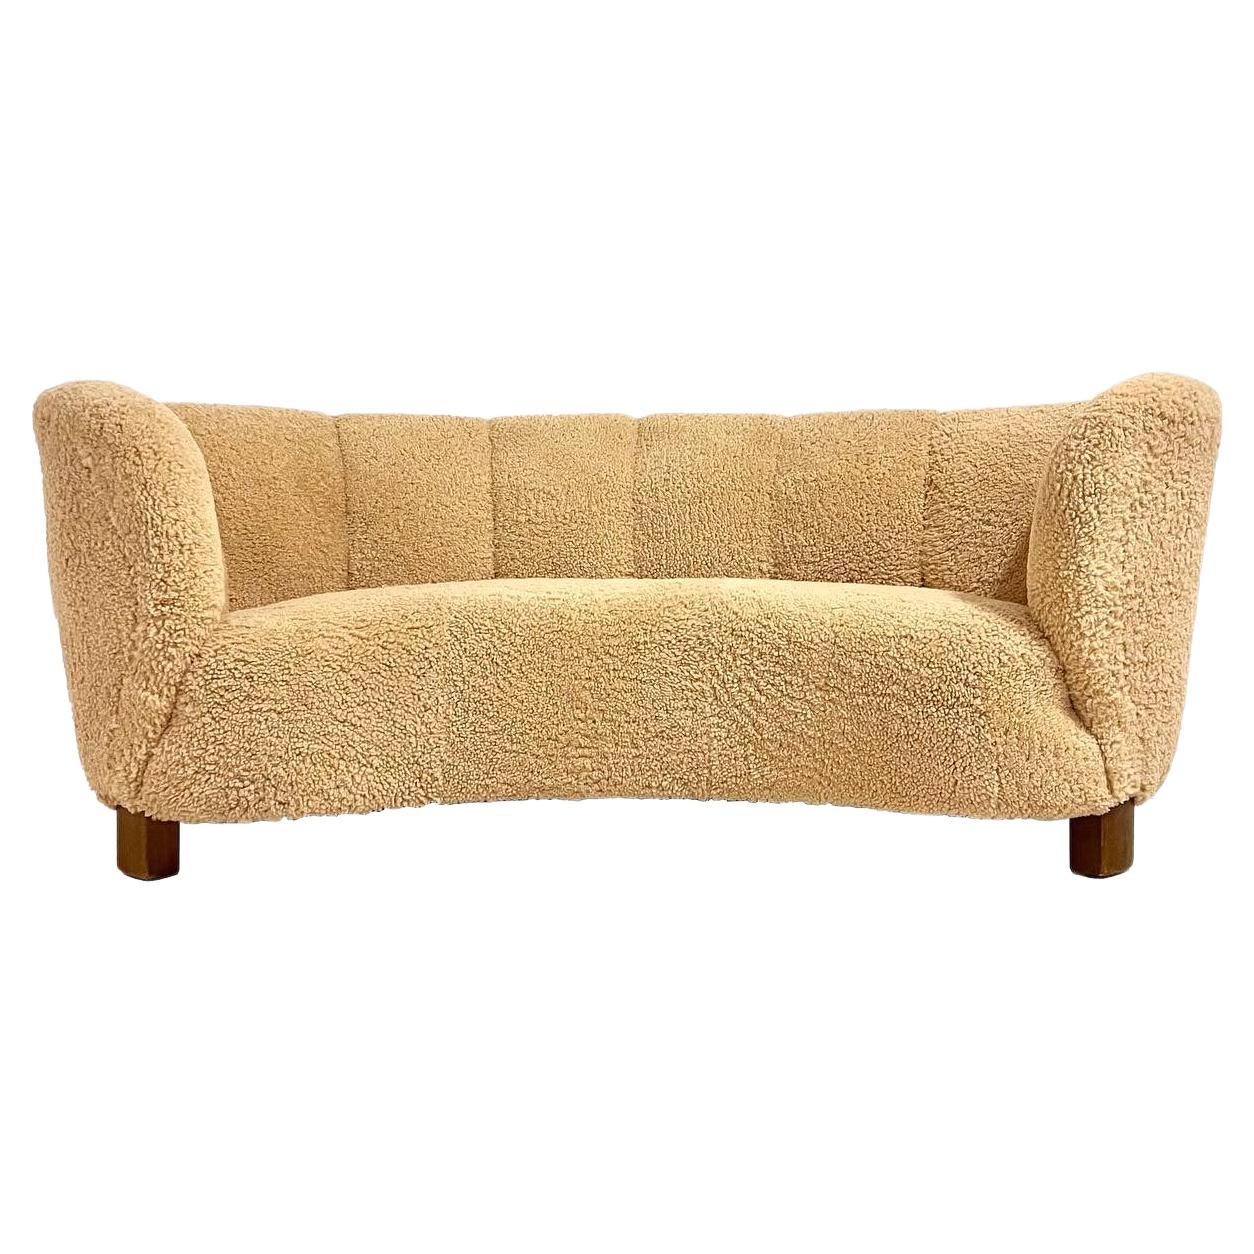 3 Seater Curved Sofa, Attributed to Fritz Hansen, Denmark C. 1930’s in Shearling